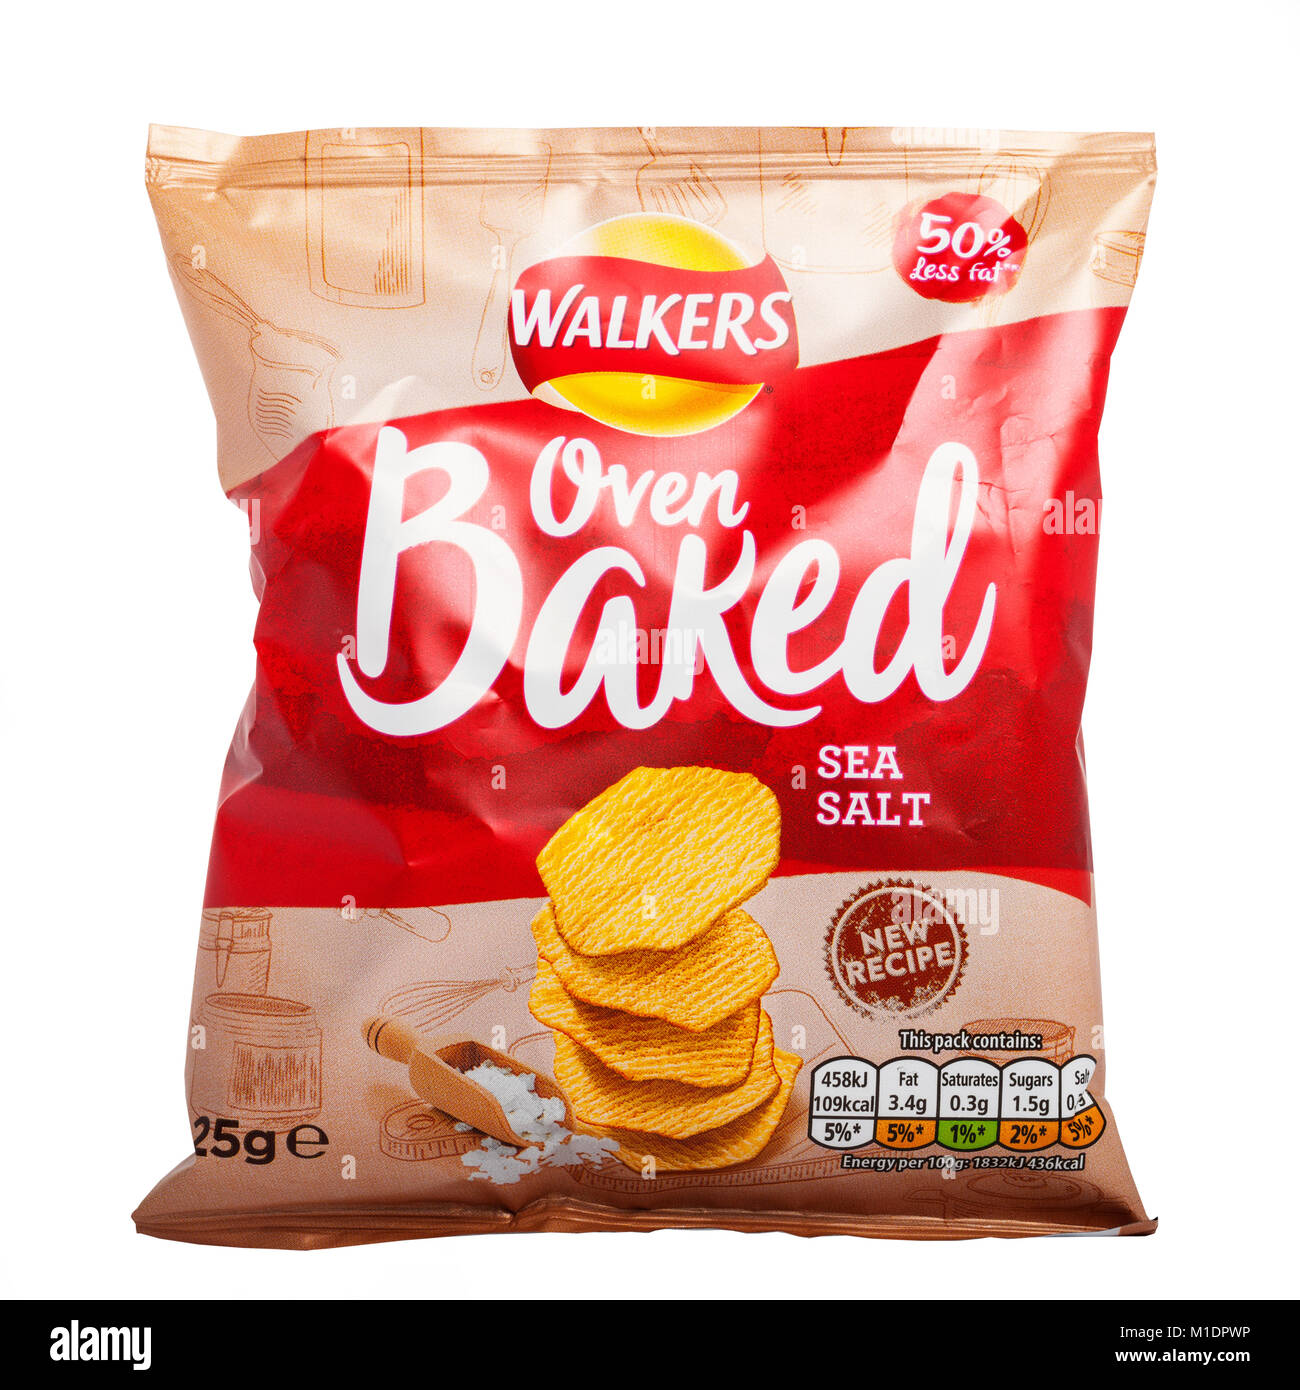 A packet of Walkers oven baked sea salt flavour crisps with 50% less fat on a white background Stock Photo